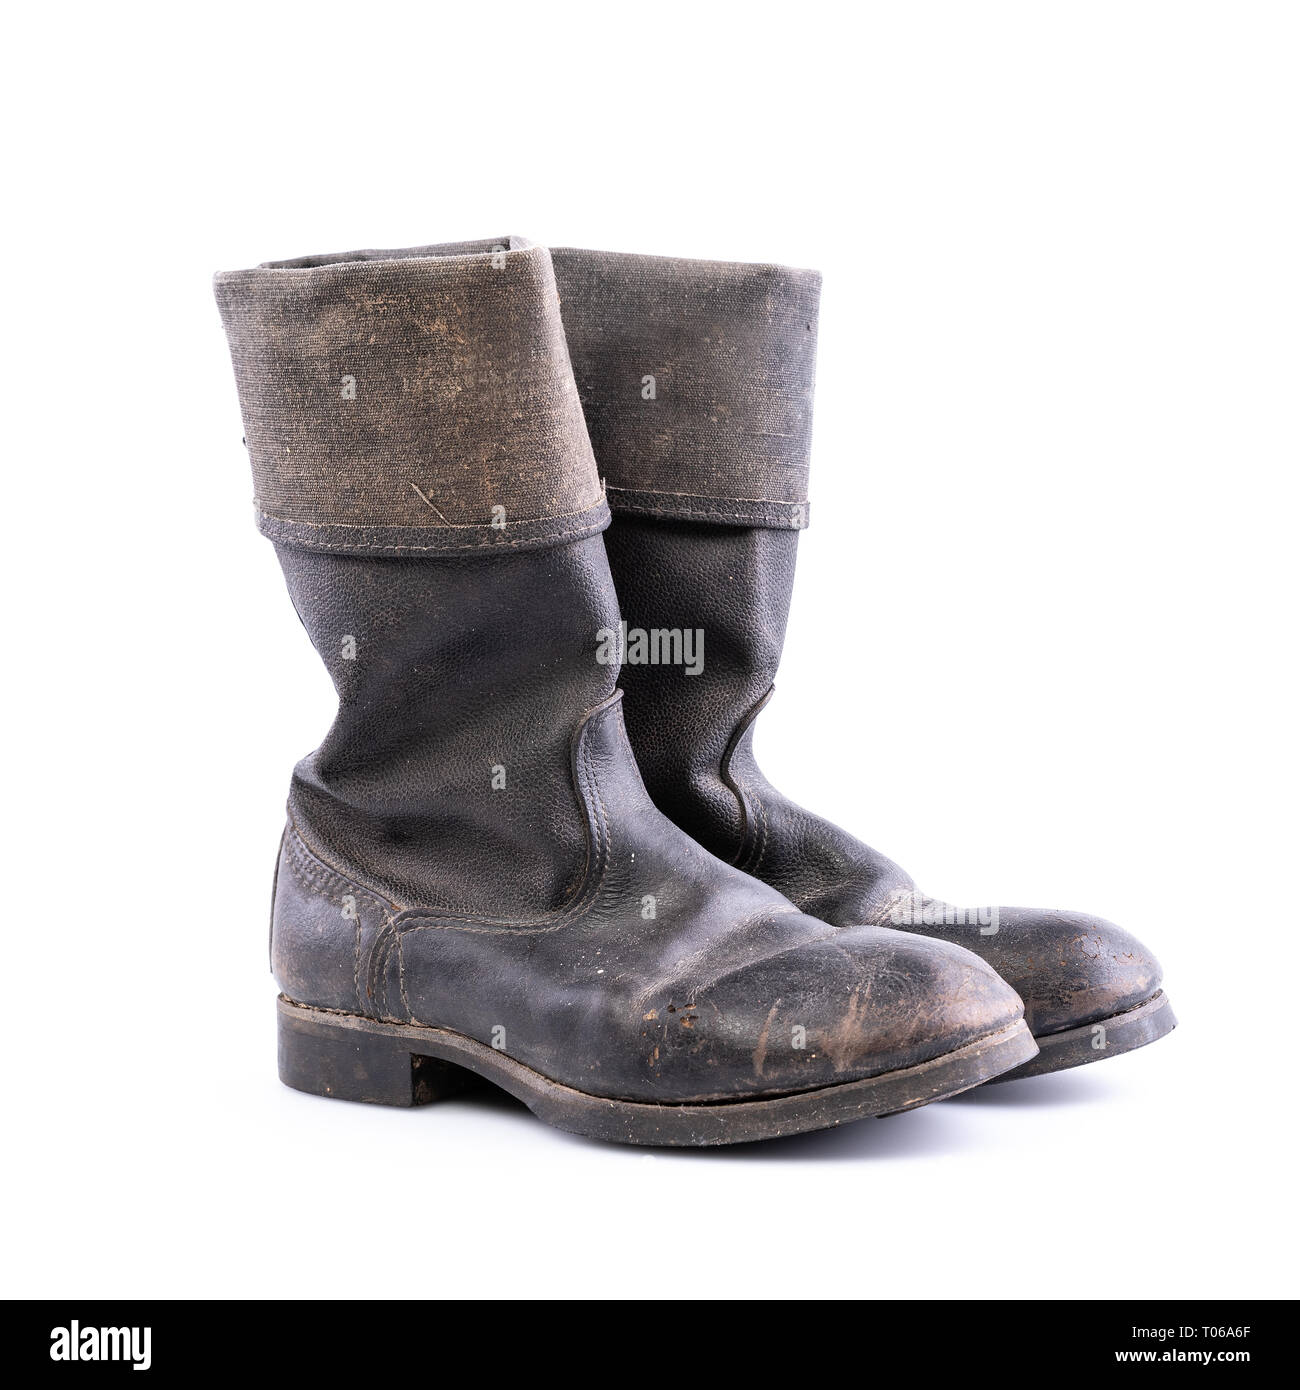 Retro boots - Kirza boots on white background, used in Soviet Union for  soldiers in the army and for work, made of artificial leather Stock Photo -  Alamy